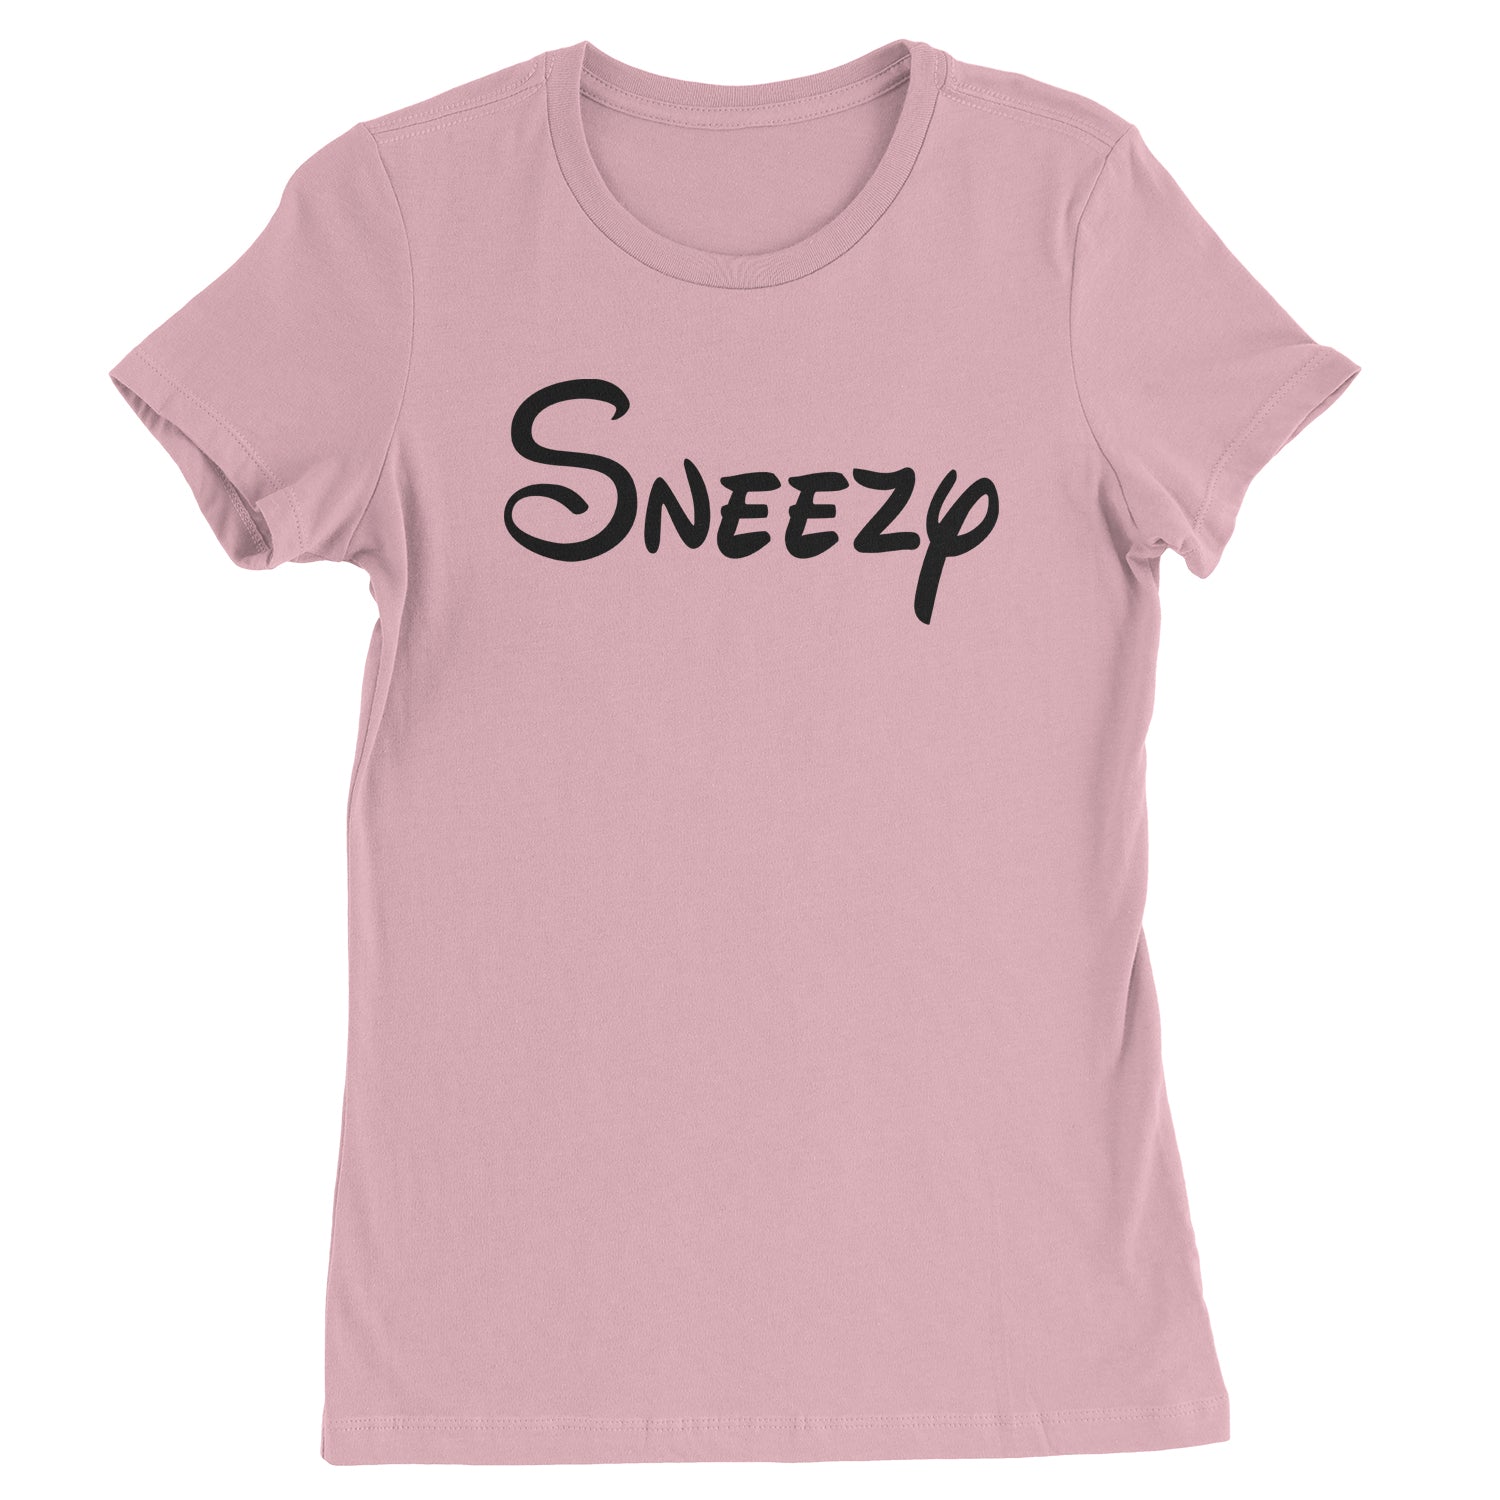 Sneezy - 7 Dwarfs Costume Womens T-shirt and, costume, dwarfs, group, halloween, matching, seven, snow, the, white by Expression Tees